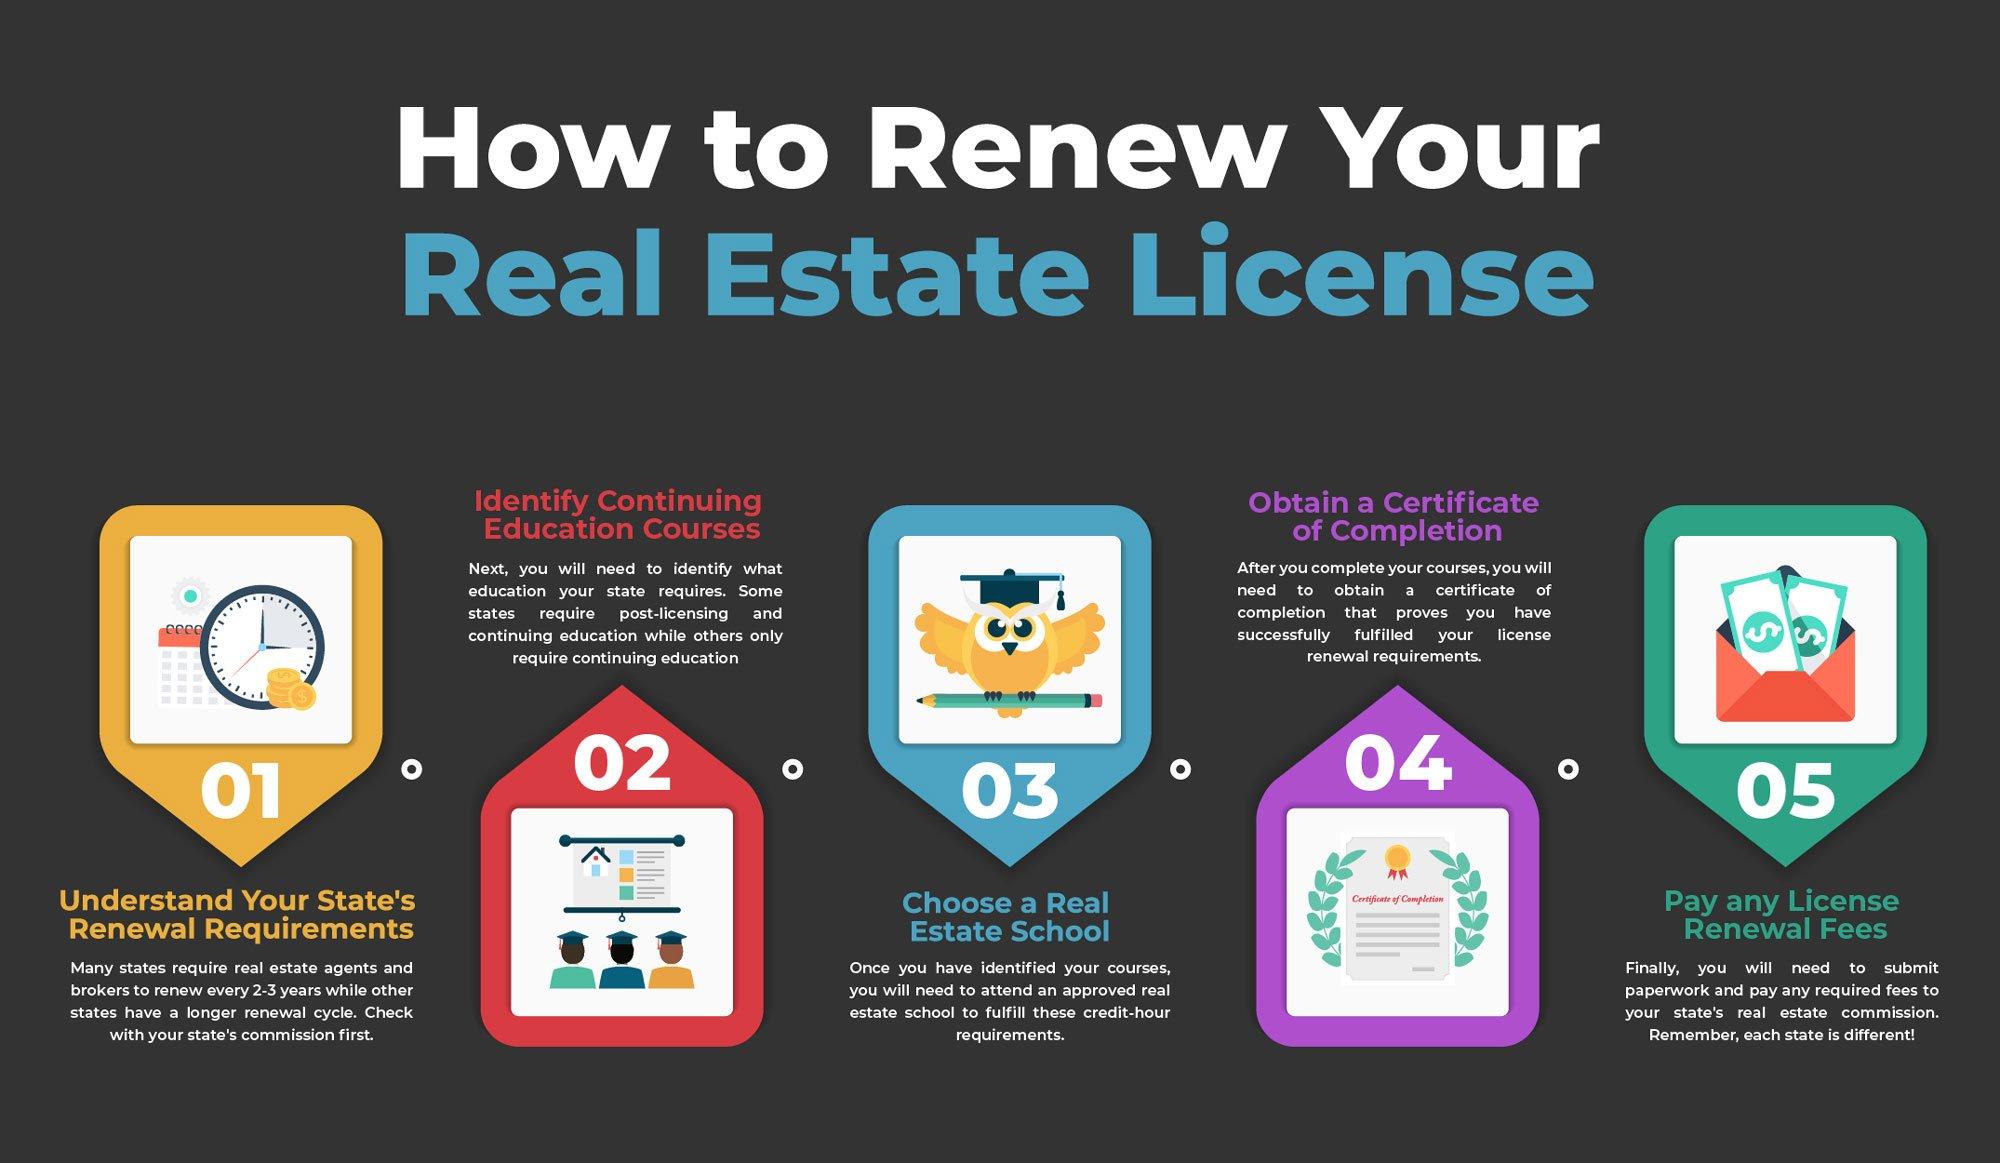 How many hours to renew real estate license